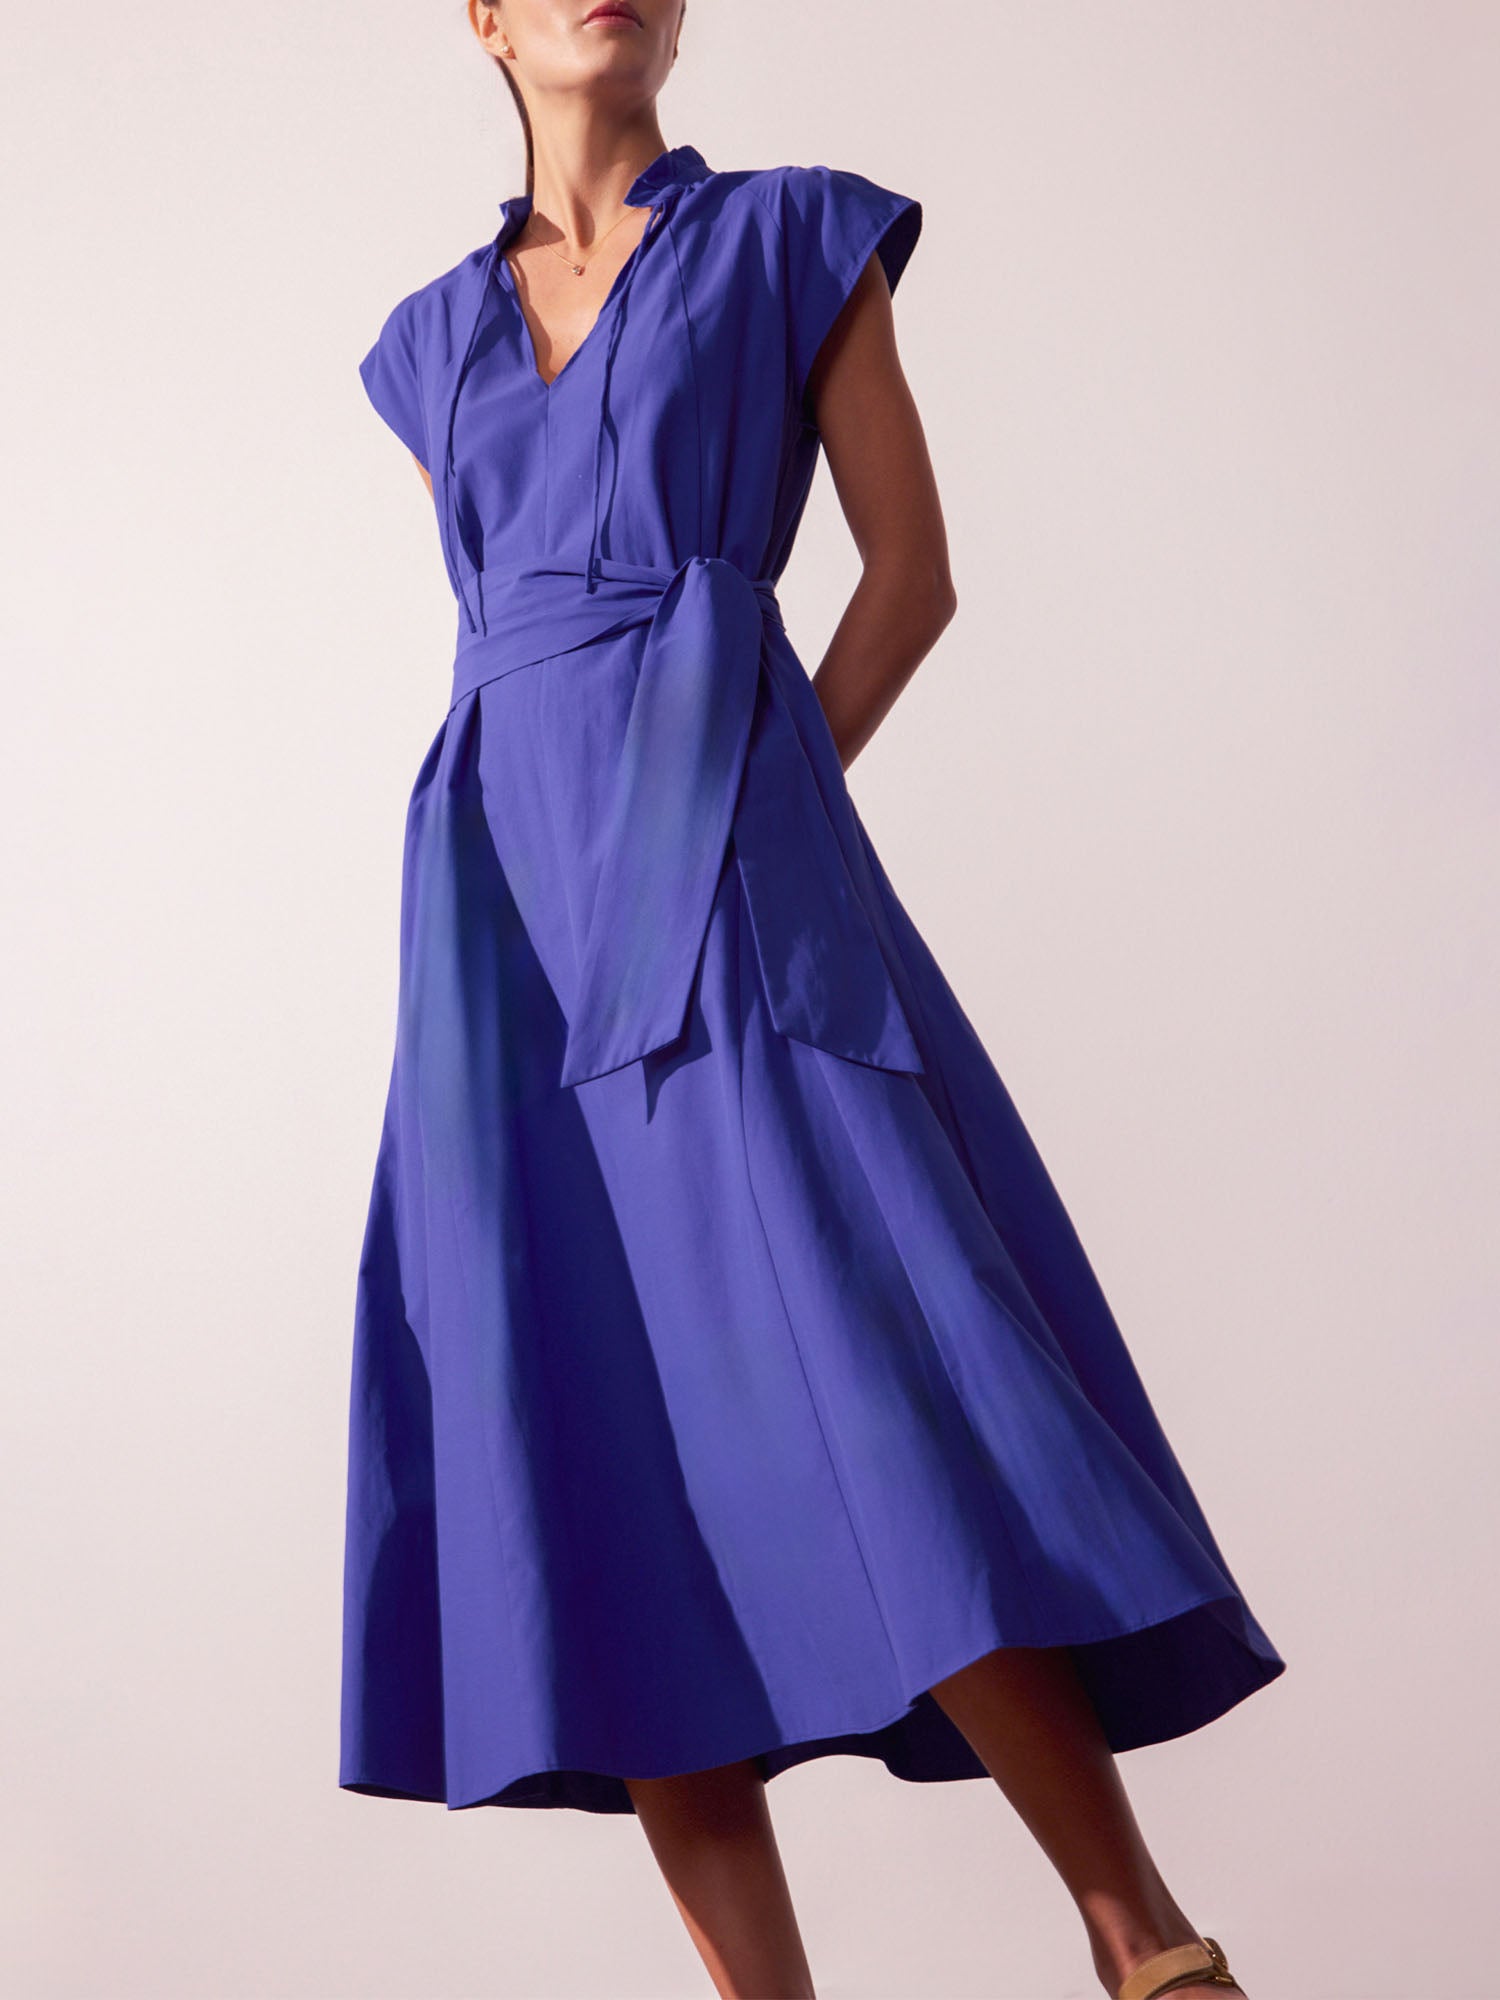 Newport ruffle belted blue midi dress  front view